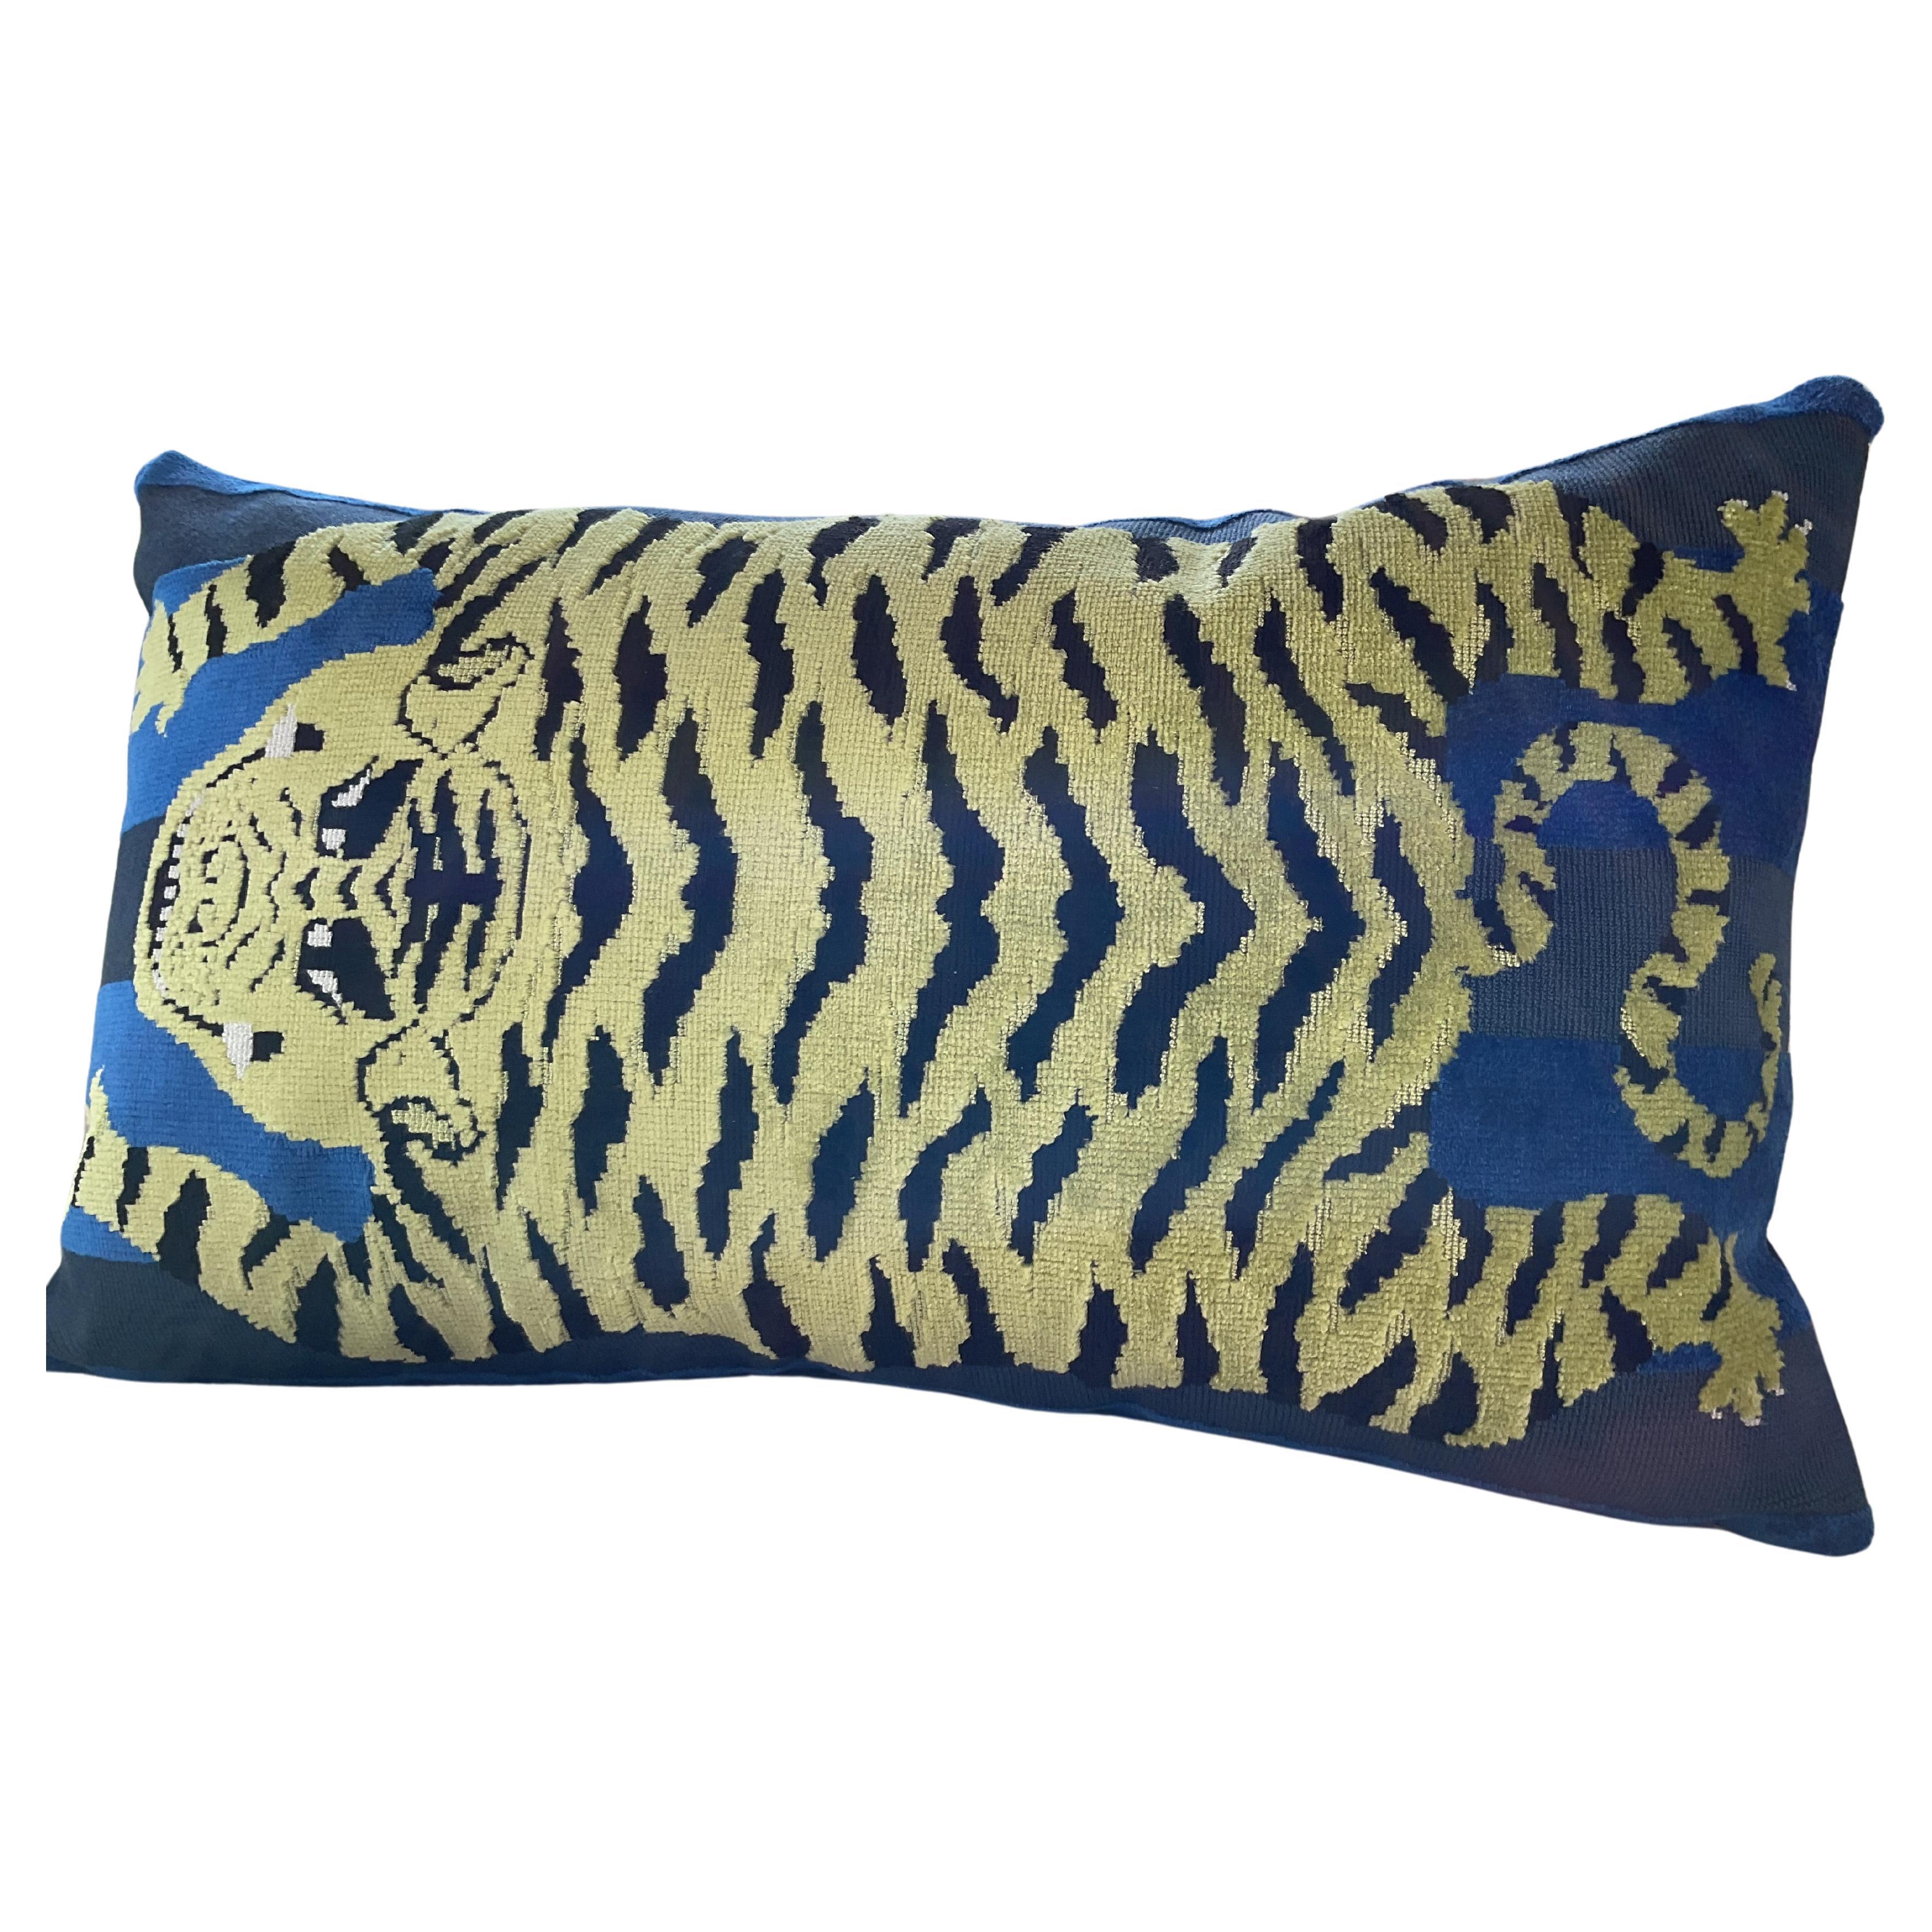 Schumacher Jokhang Tiger in blue down filled pillow measuring 12 x 20 For Sale